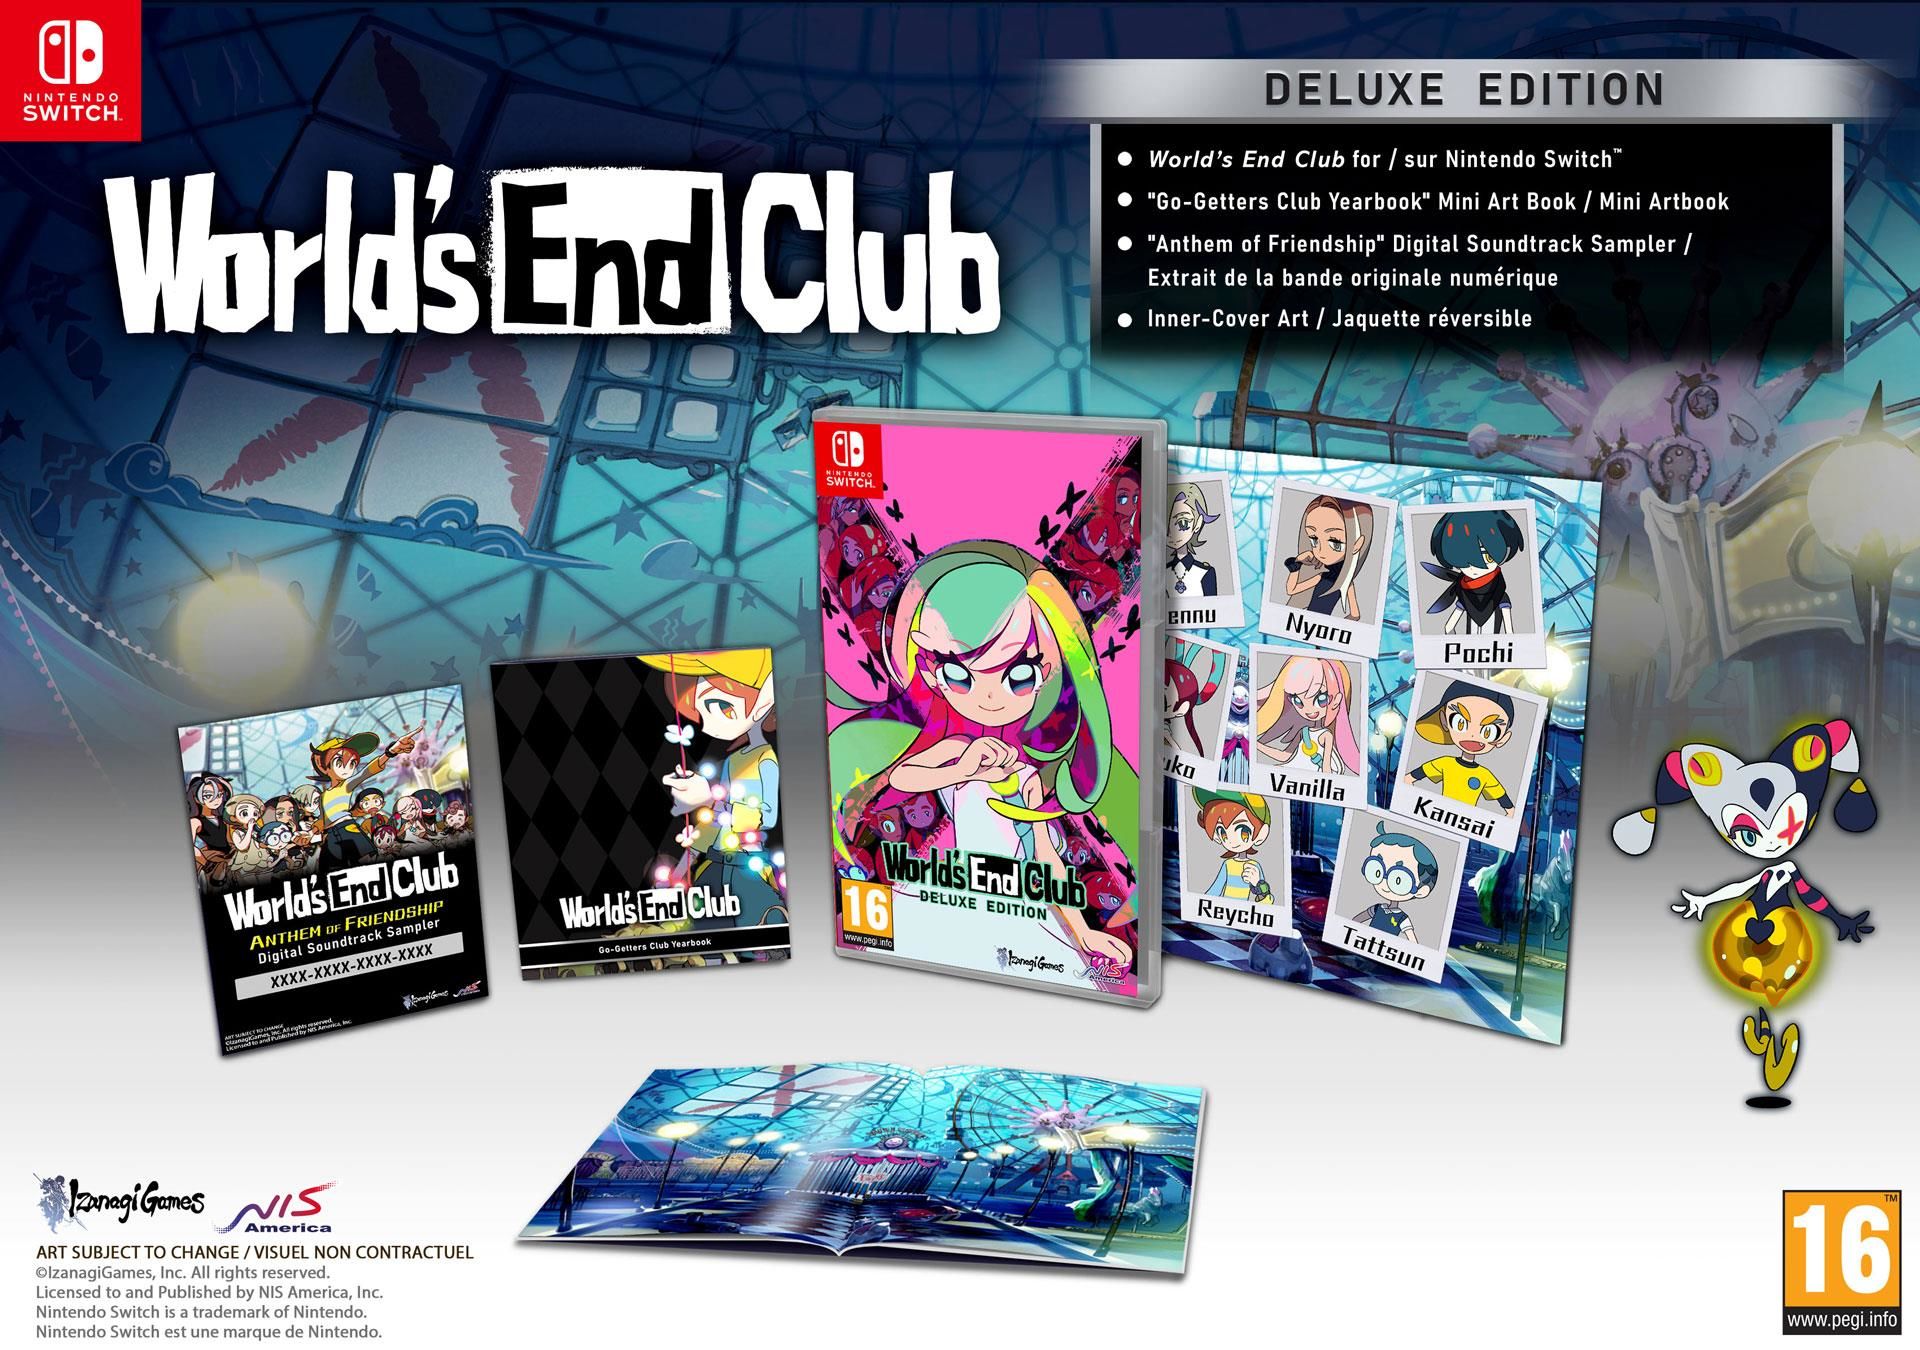 World’s End Club Deluxe Edition